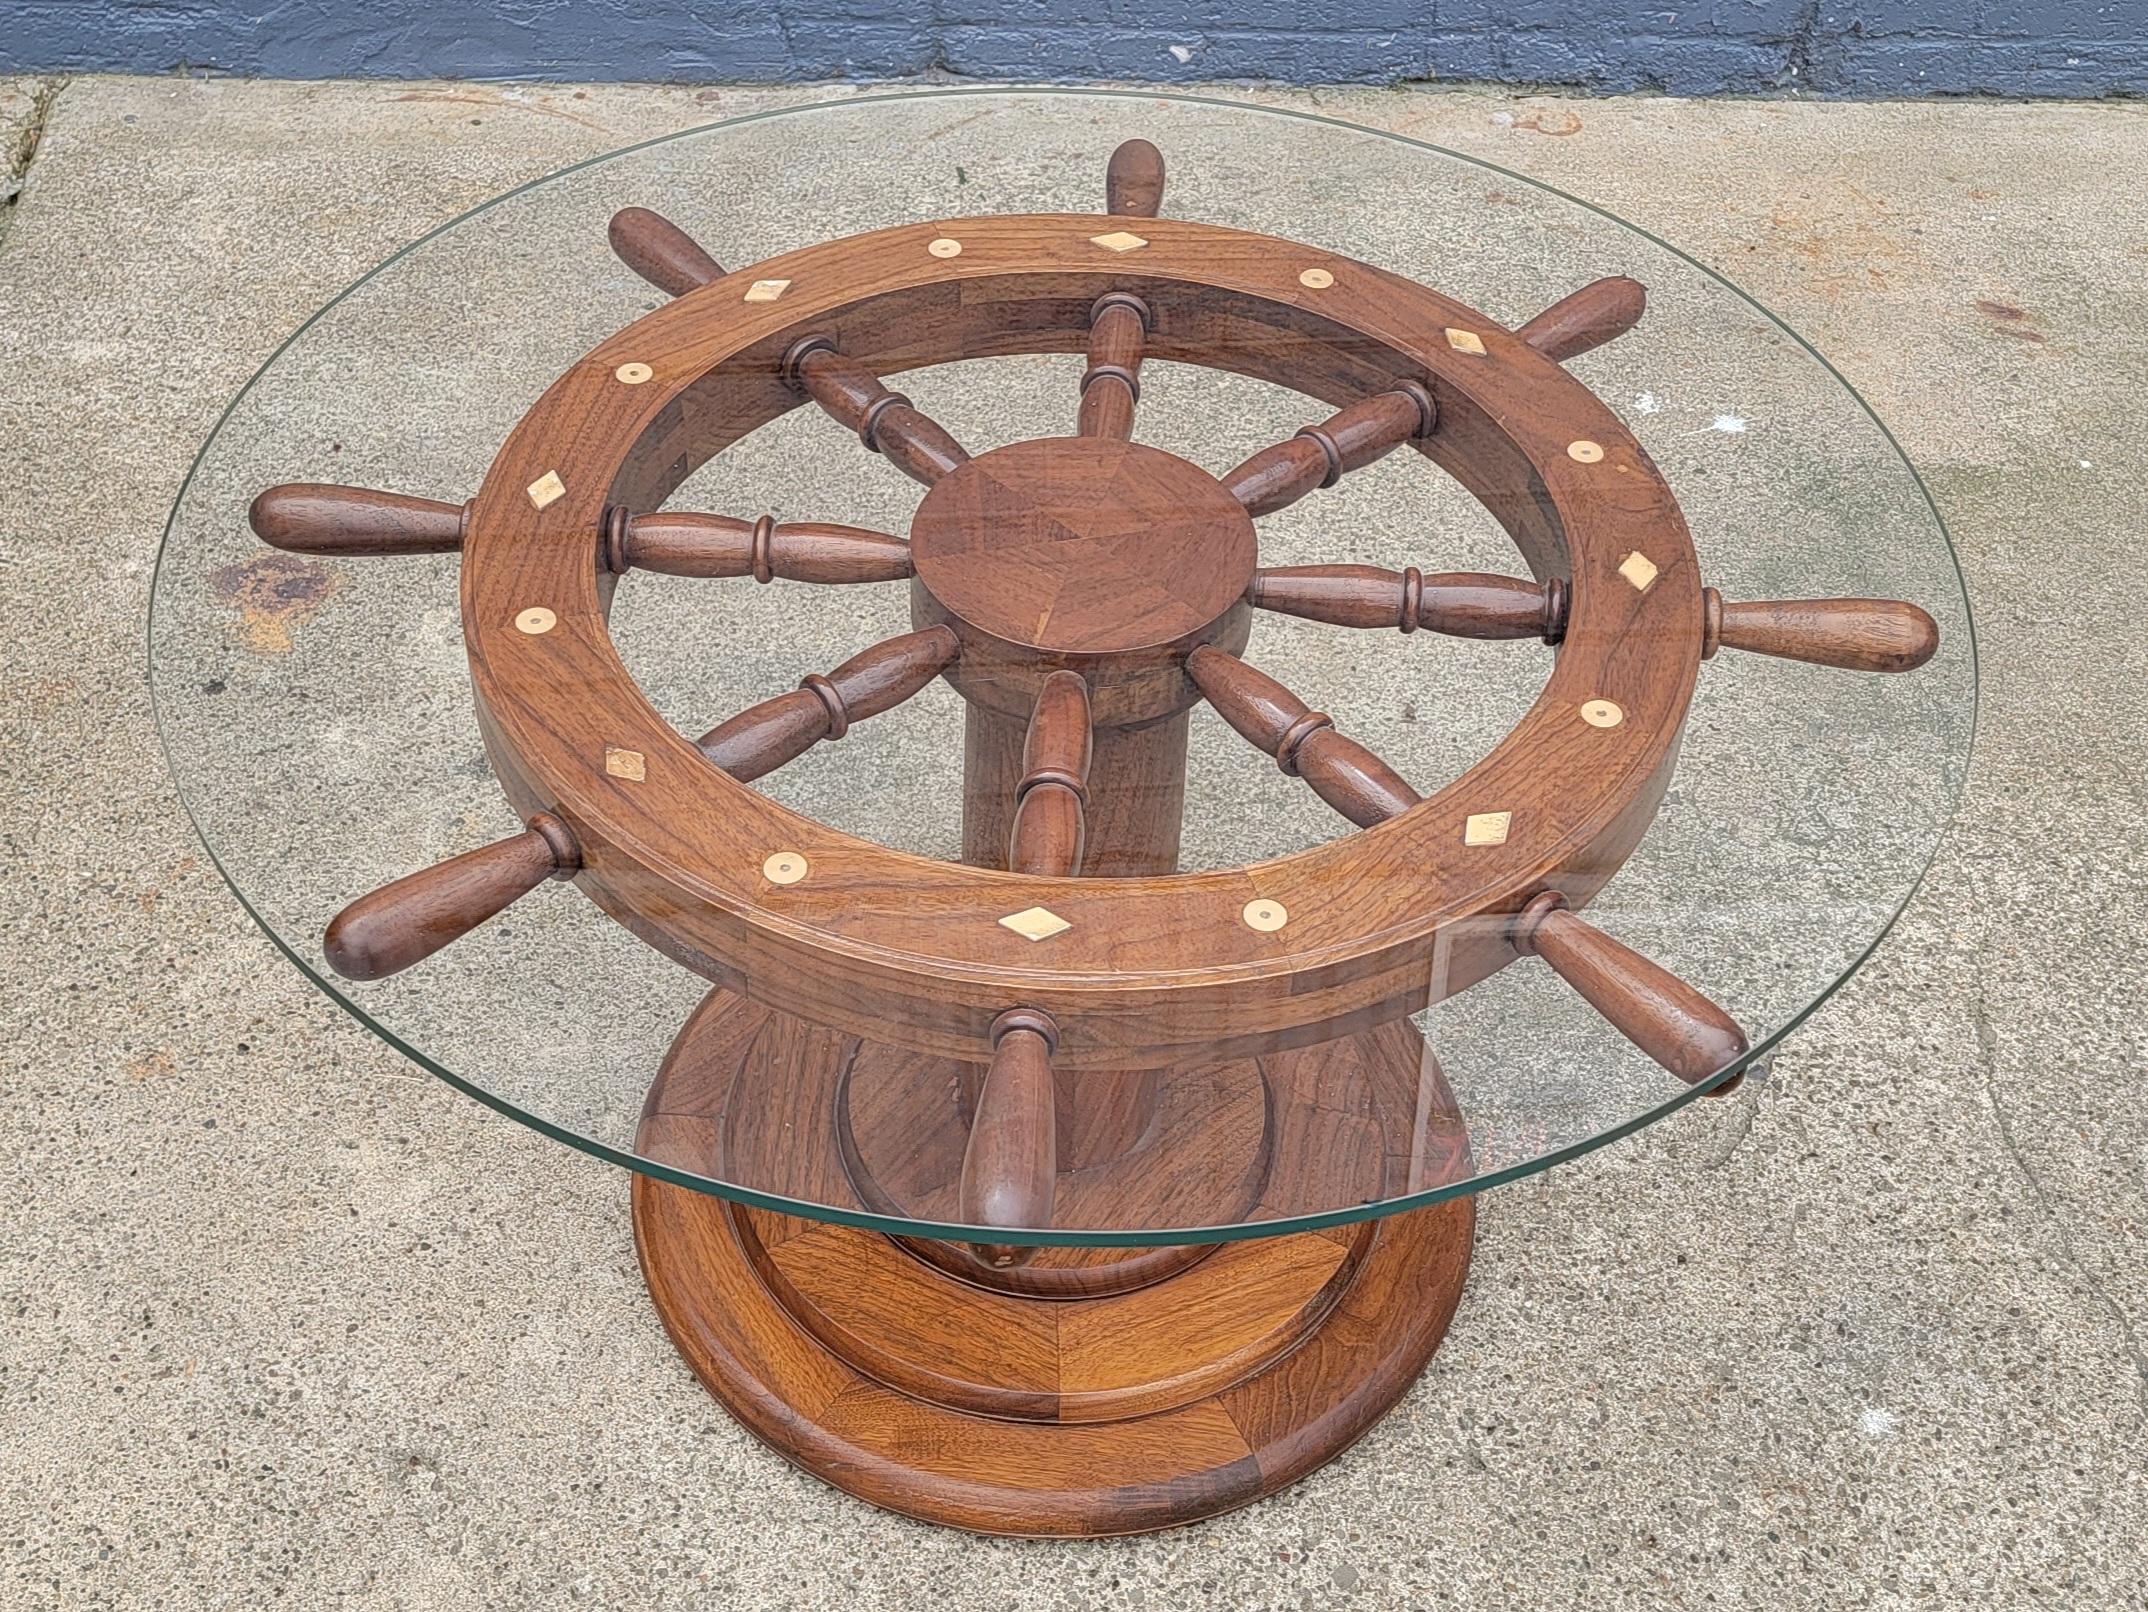 Nautical theme ships wheel coffee or side table. Fine joinery and craftsmanship. Crafted in solid walnut. Includes circular glass top.